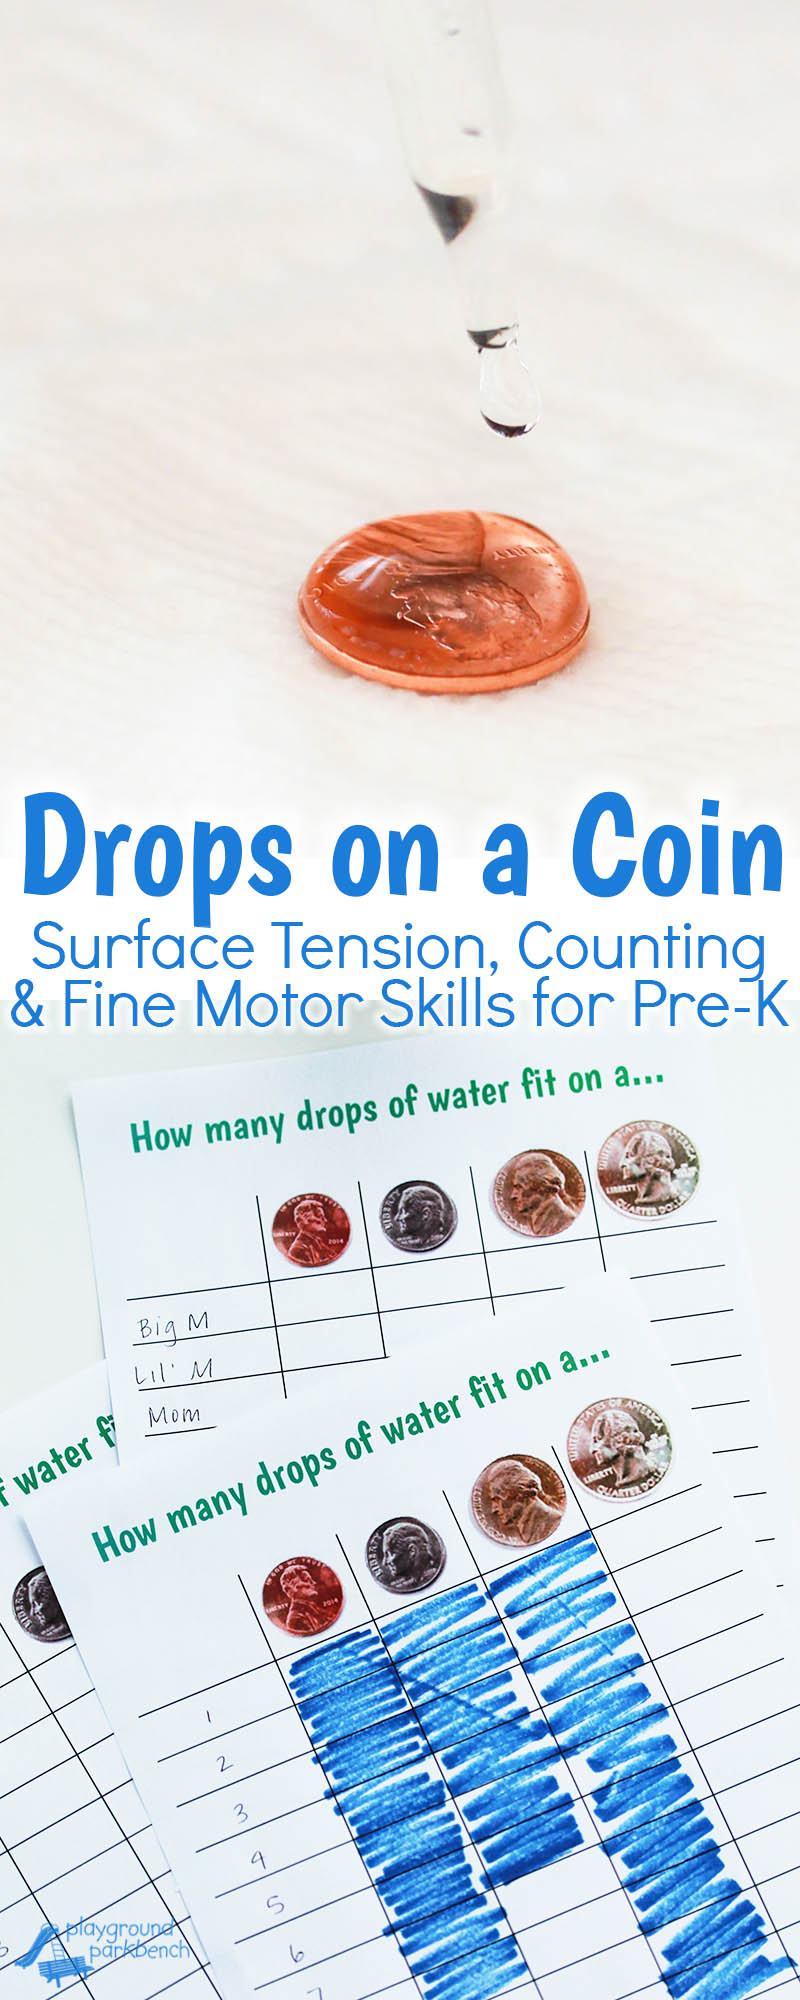 Quick and easy simple preschool STEM activities explores water, surface tension and coins, while challenging fine motor skills with an eye dropper. Free printable chart to record results as a class, trials by individual students or record results in a bar graph form. | Preschool | STEM | STEAM Kids | Science | Early Childhood Education | Kids Activities